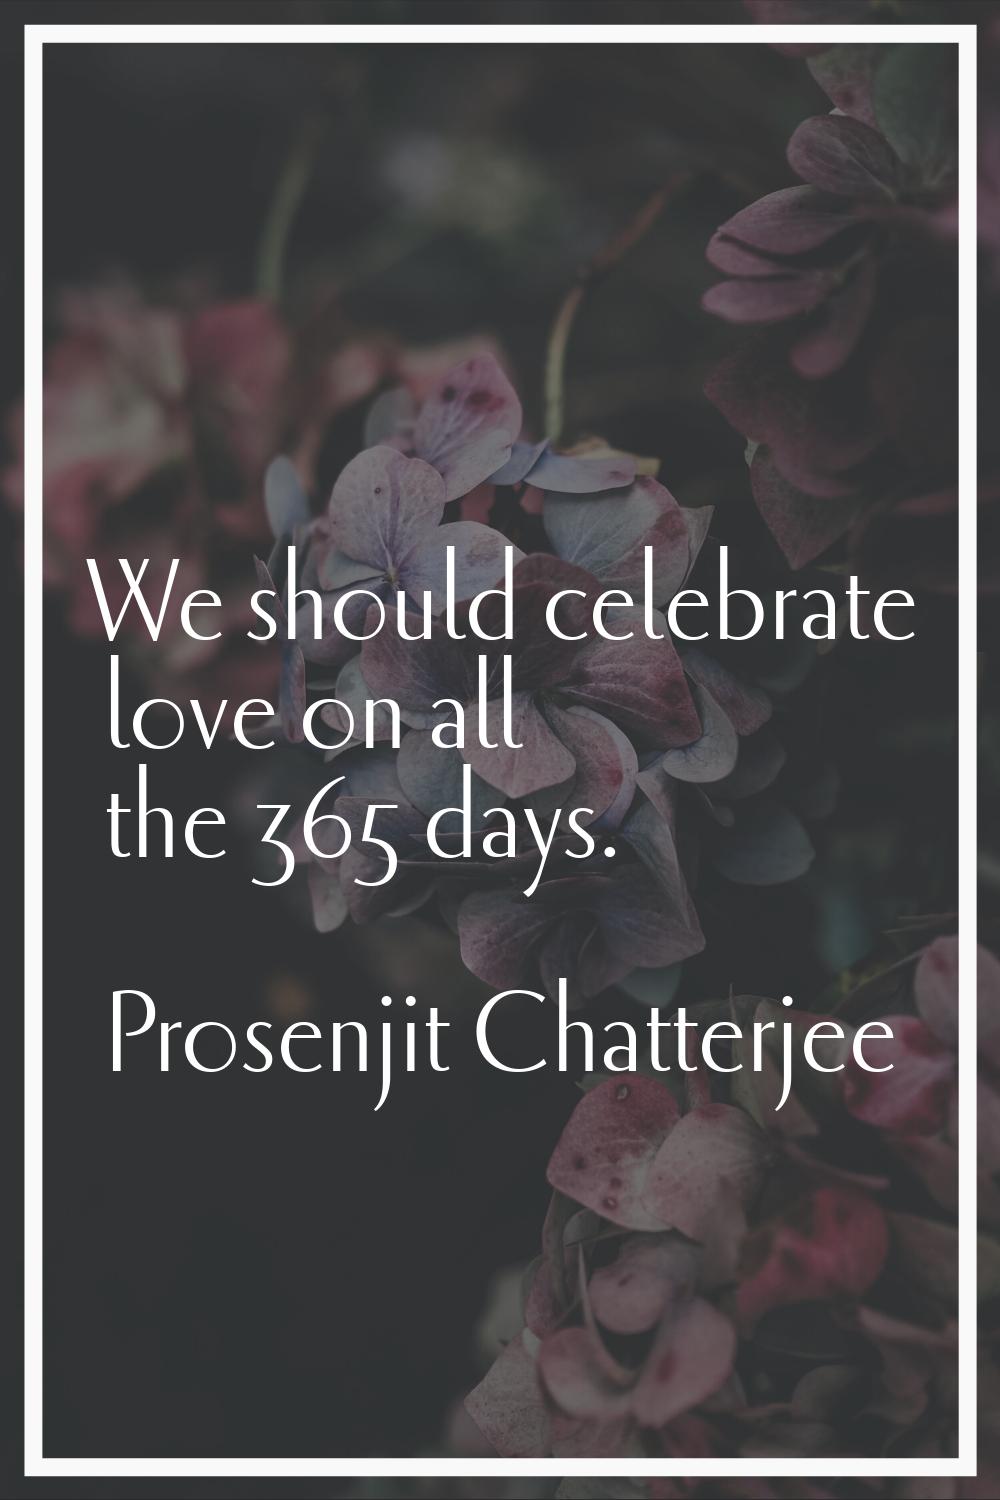 We should celebrate love on all the 365 days.